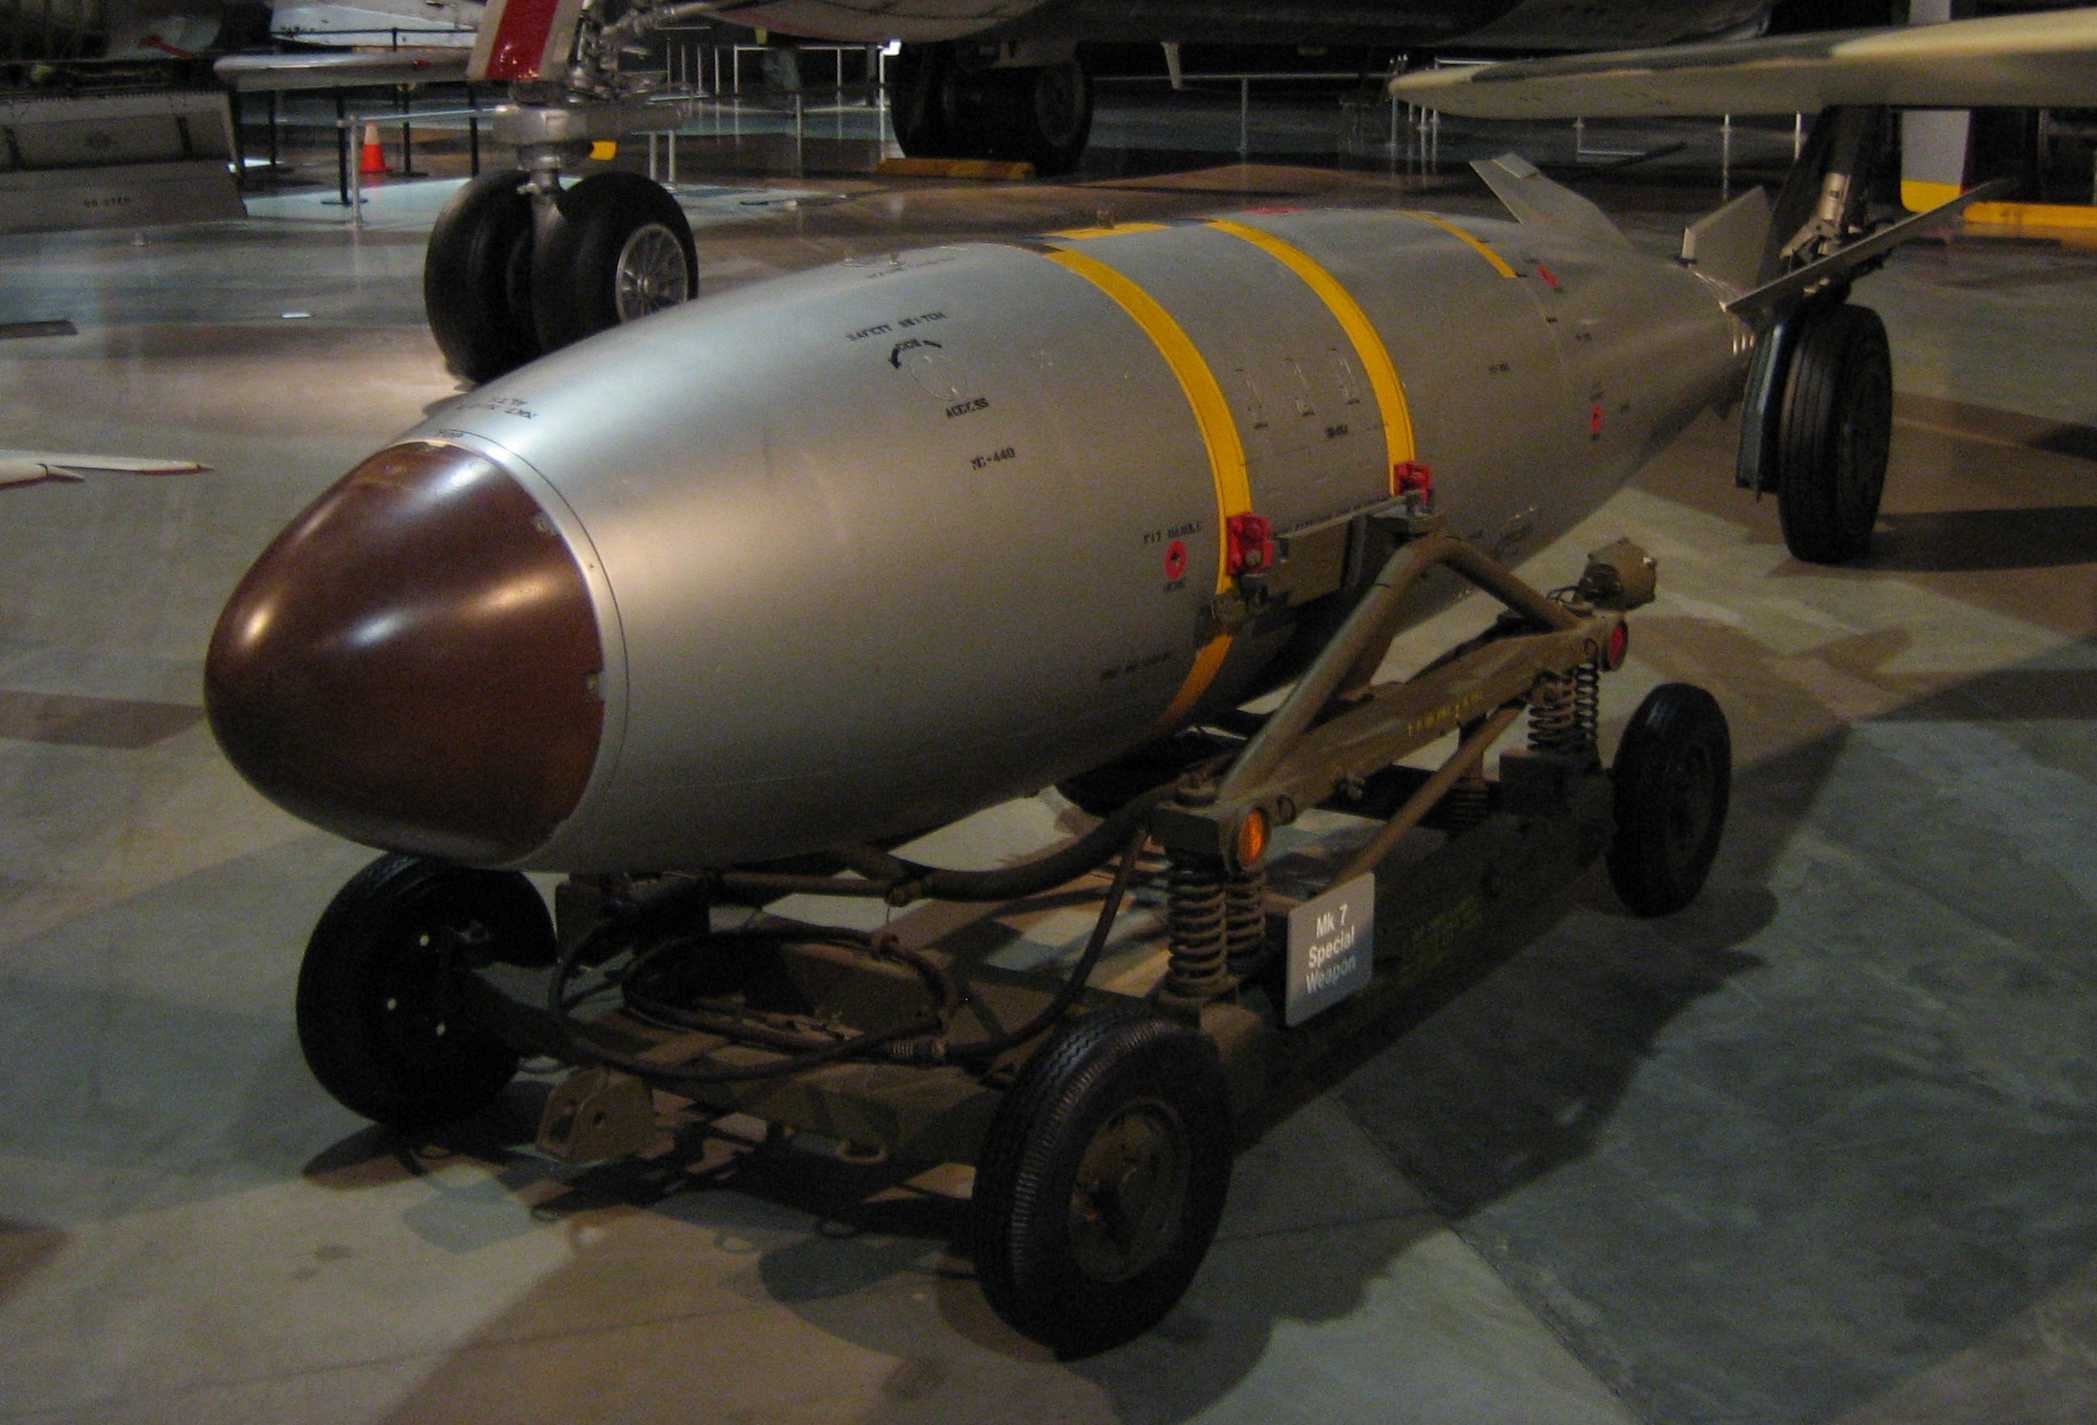 Mark 7 nuclear bomb at USAF Museum